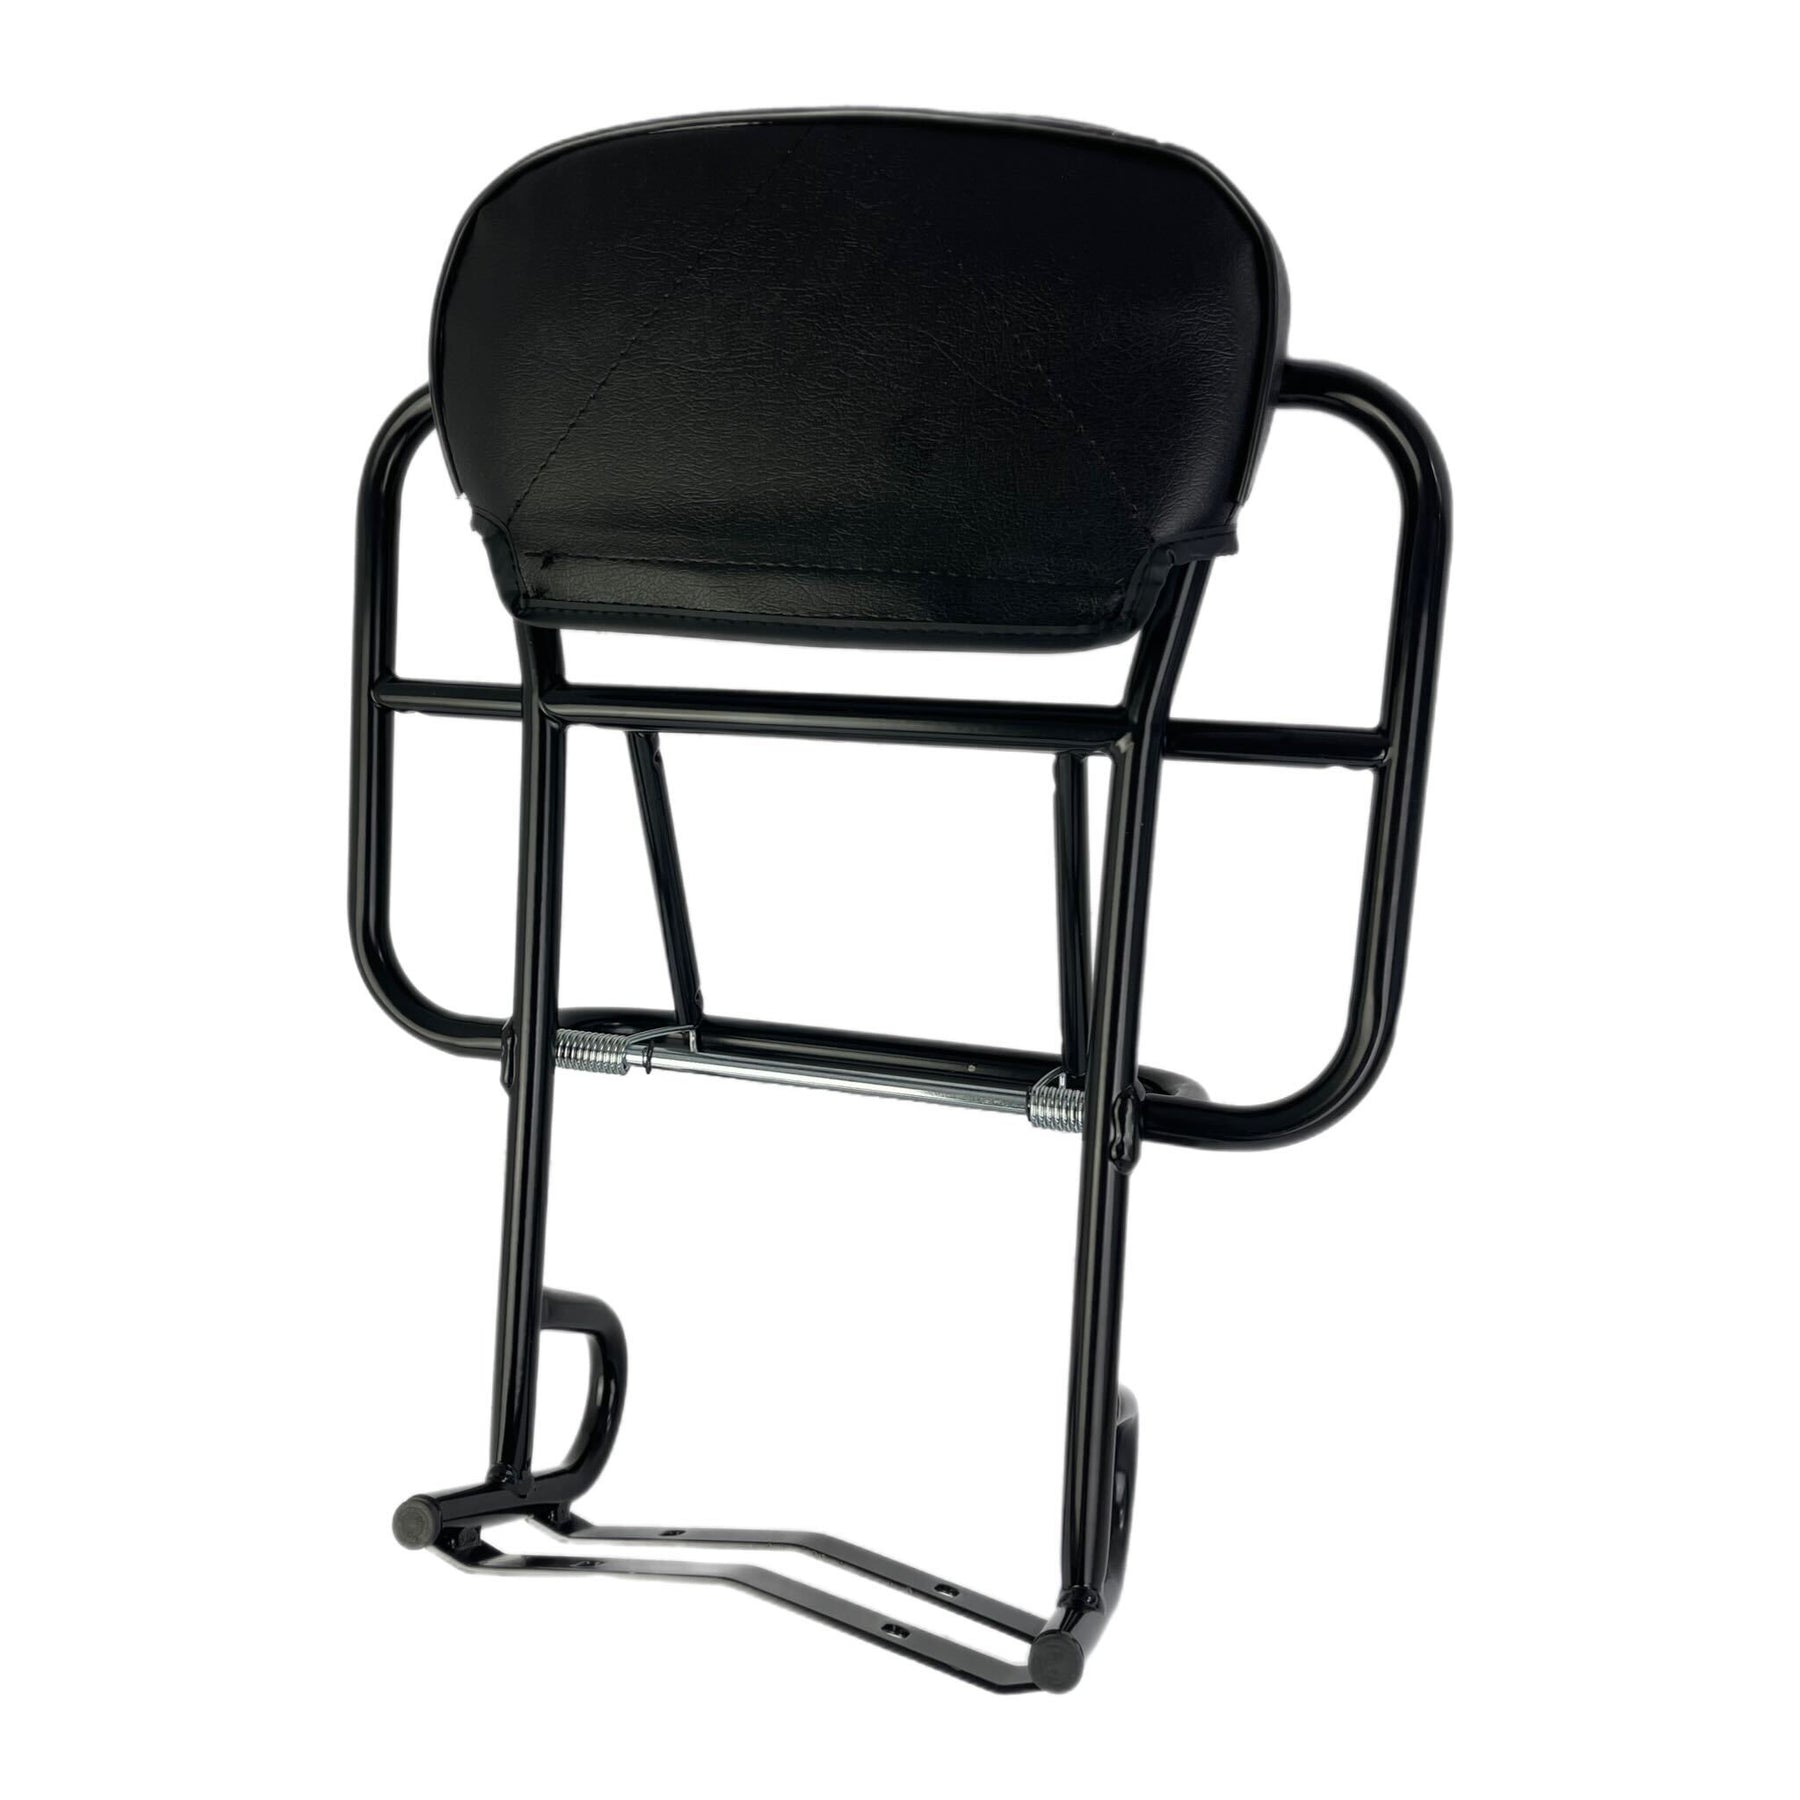 Royal Alloy GP GT TG Scomadi TL 2 in 1 Backrest & Fold Down Carrier - Black Cuppini